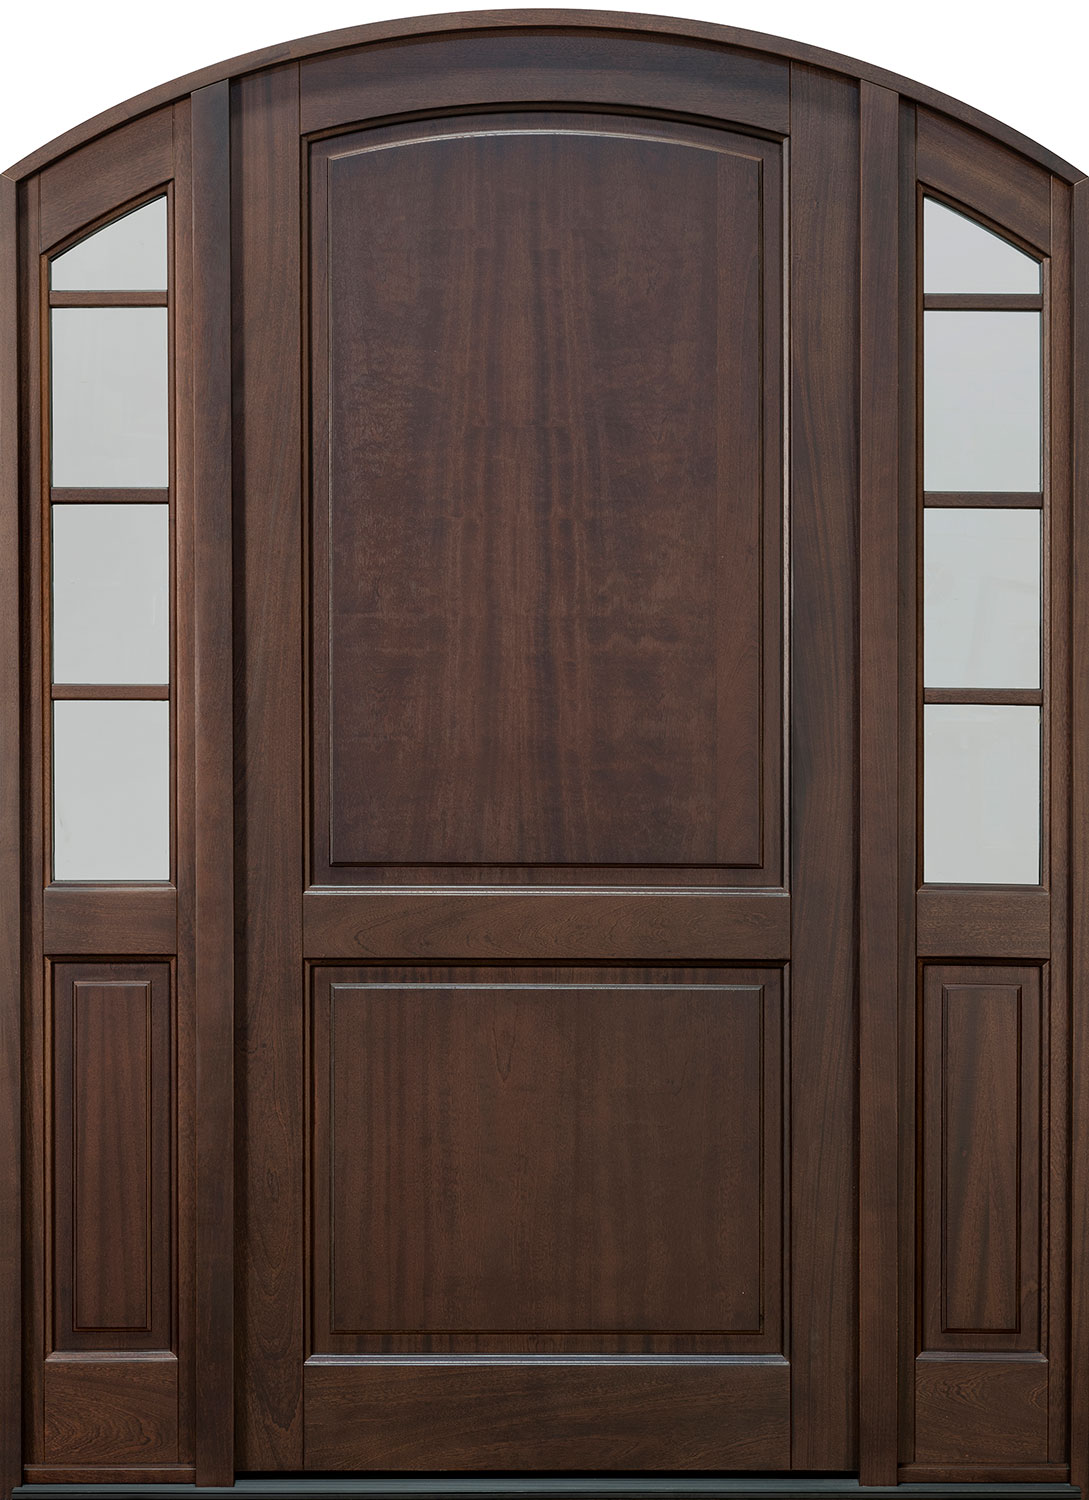 Classic Mahogany Solid Wood Front Entry Door - Single with 2 Sidelites - DB-802PW 2SL